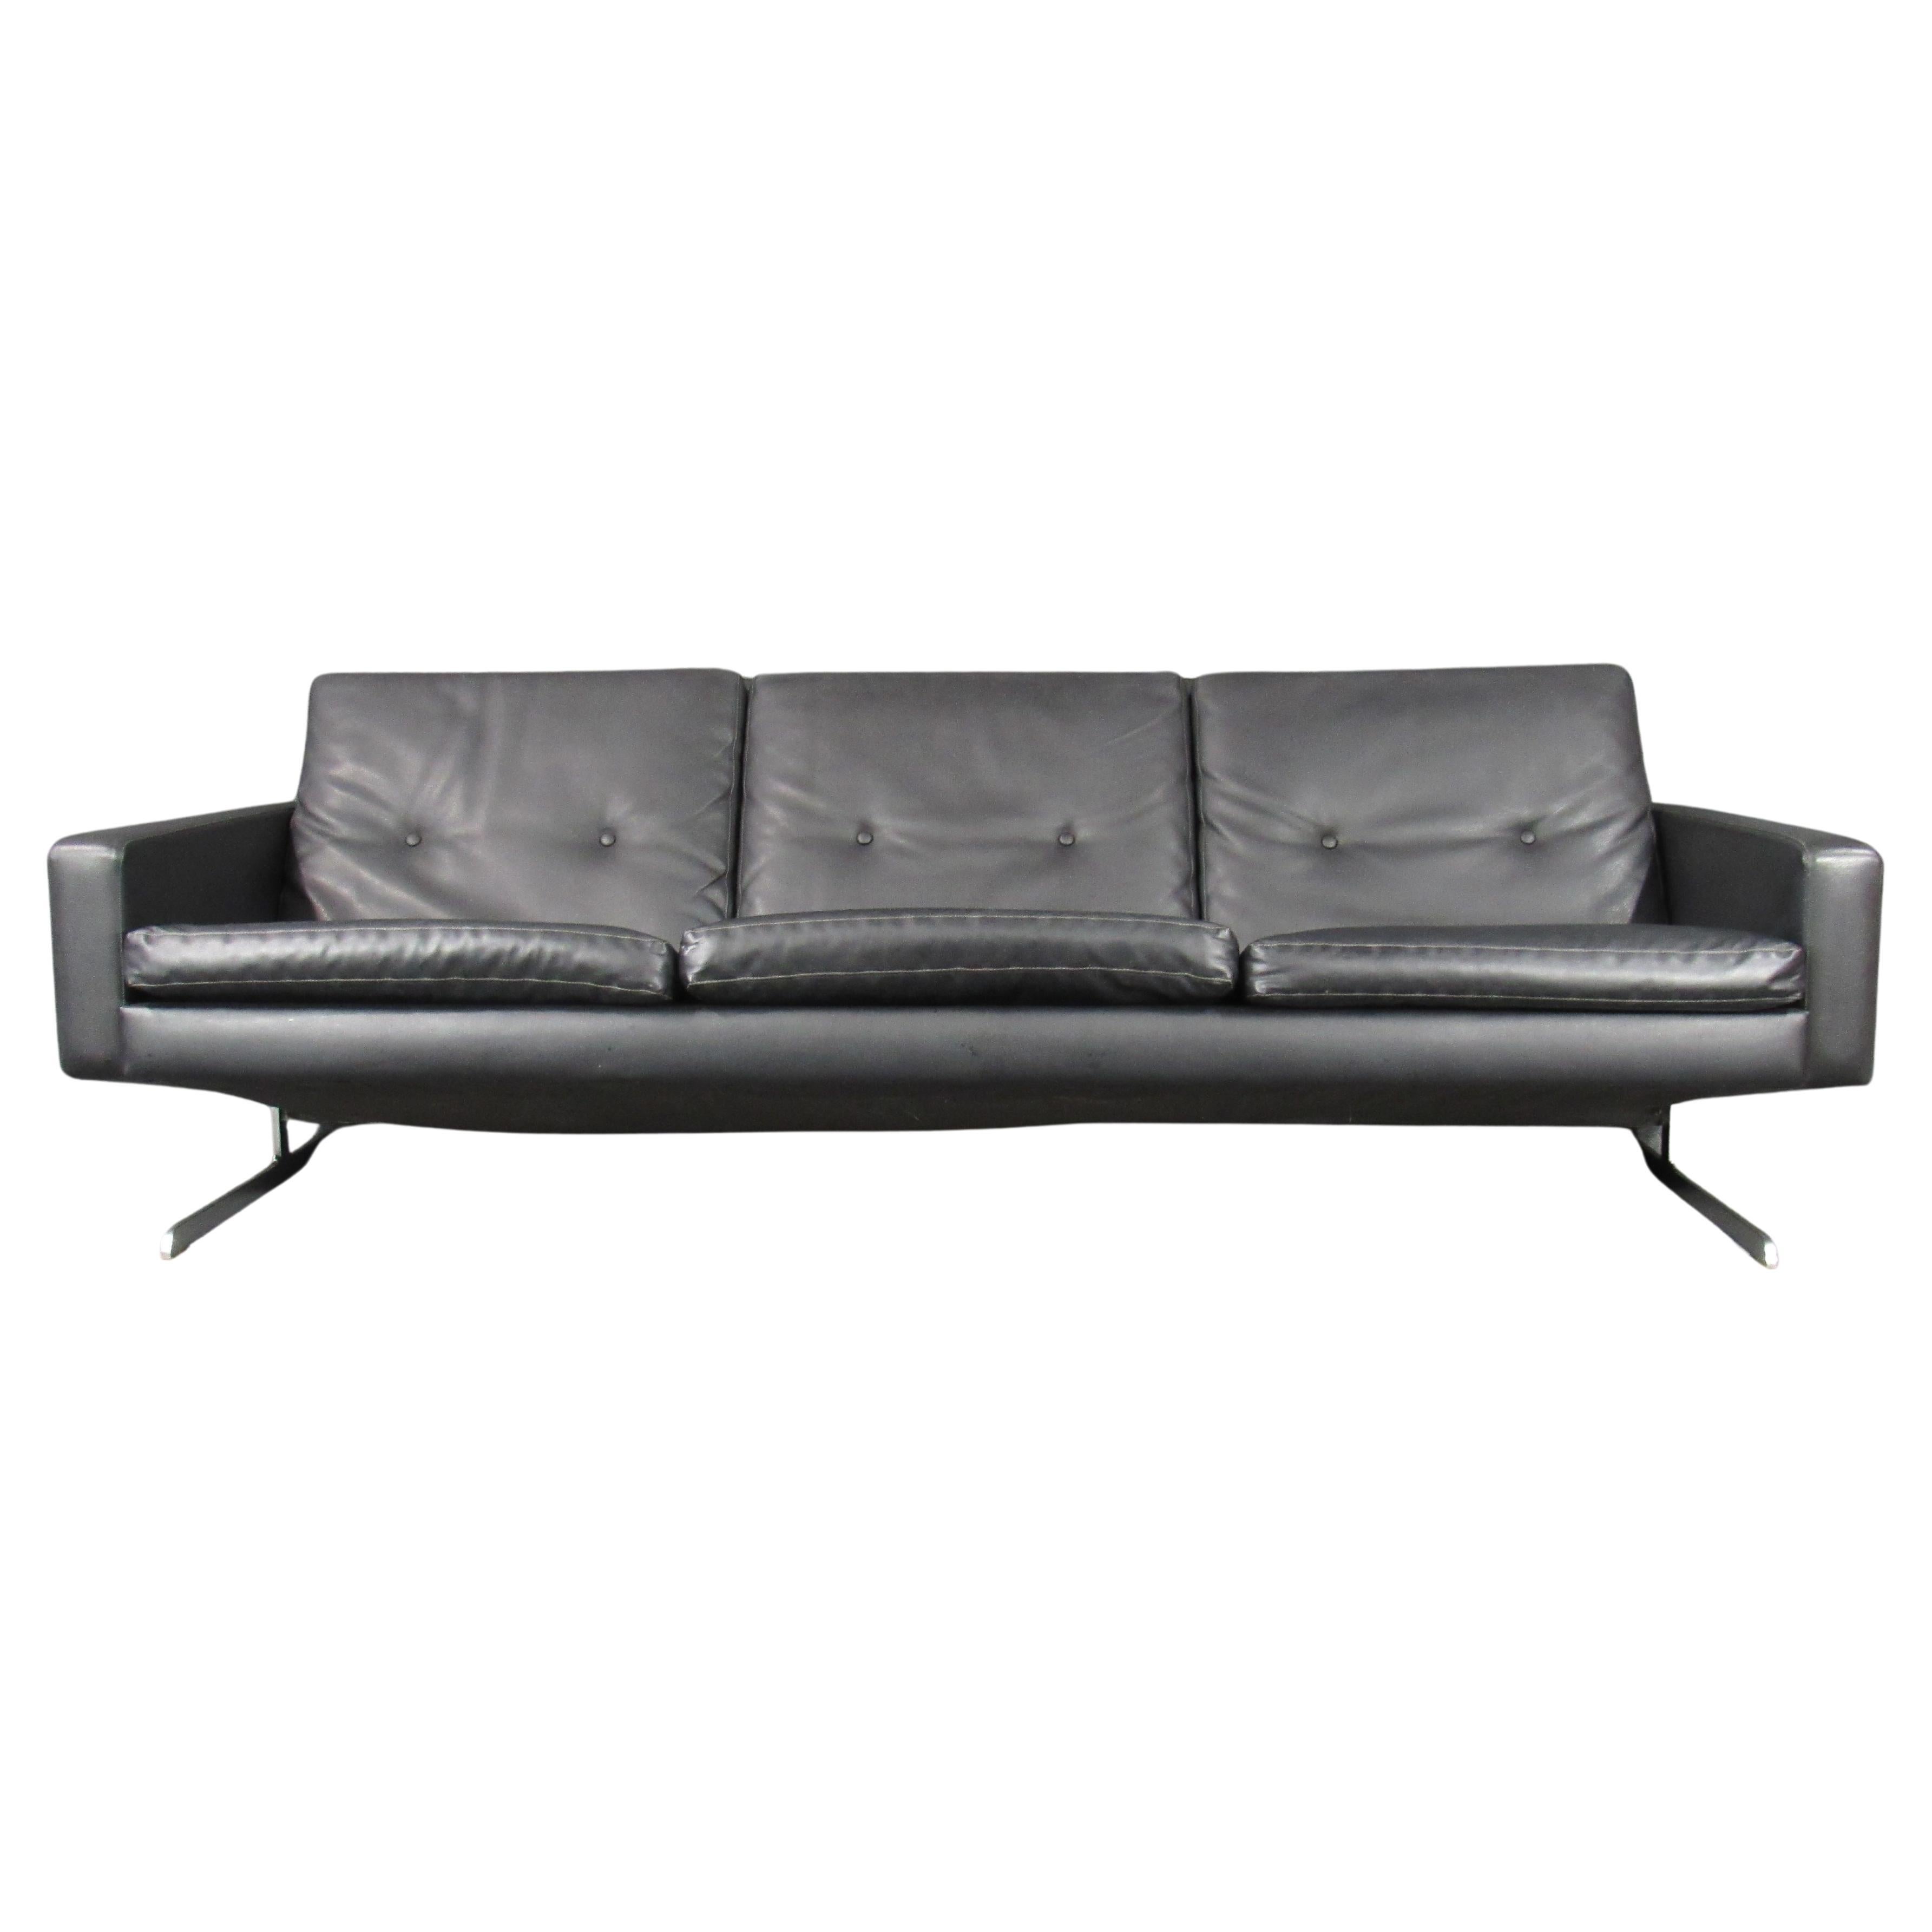 Midcentury Danish Modern Sofa in Faux Black Leather Attributed to Georg Thams For Sale